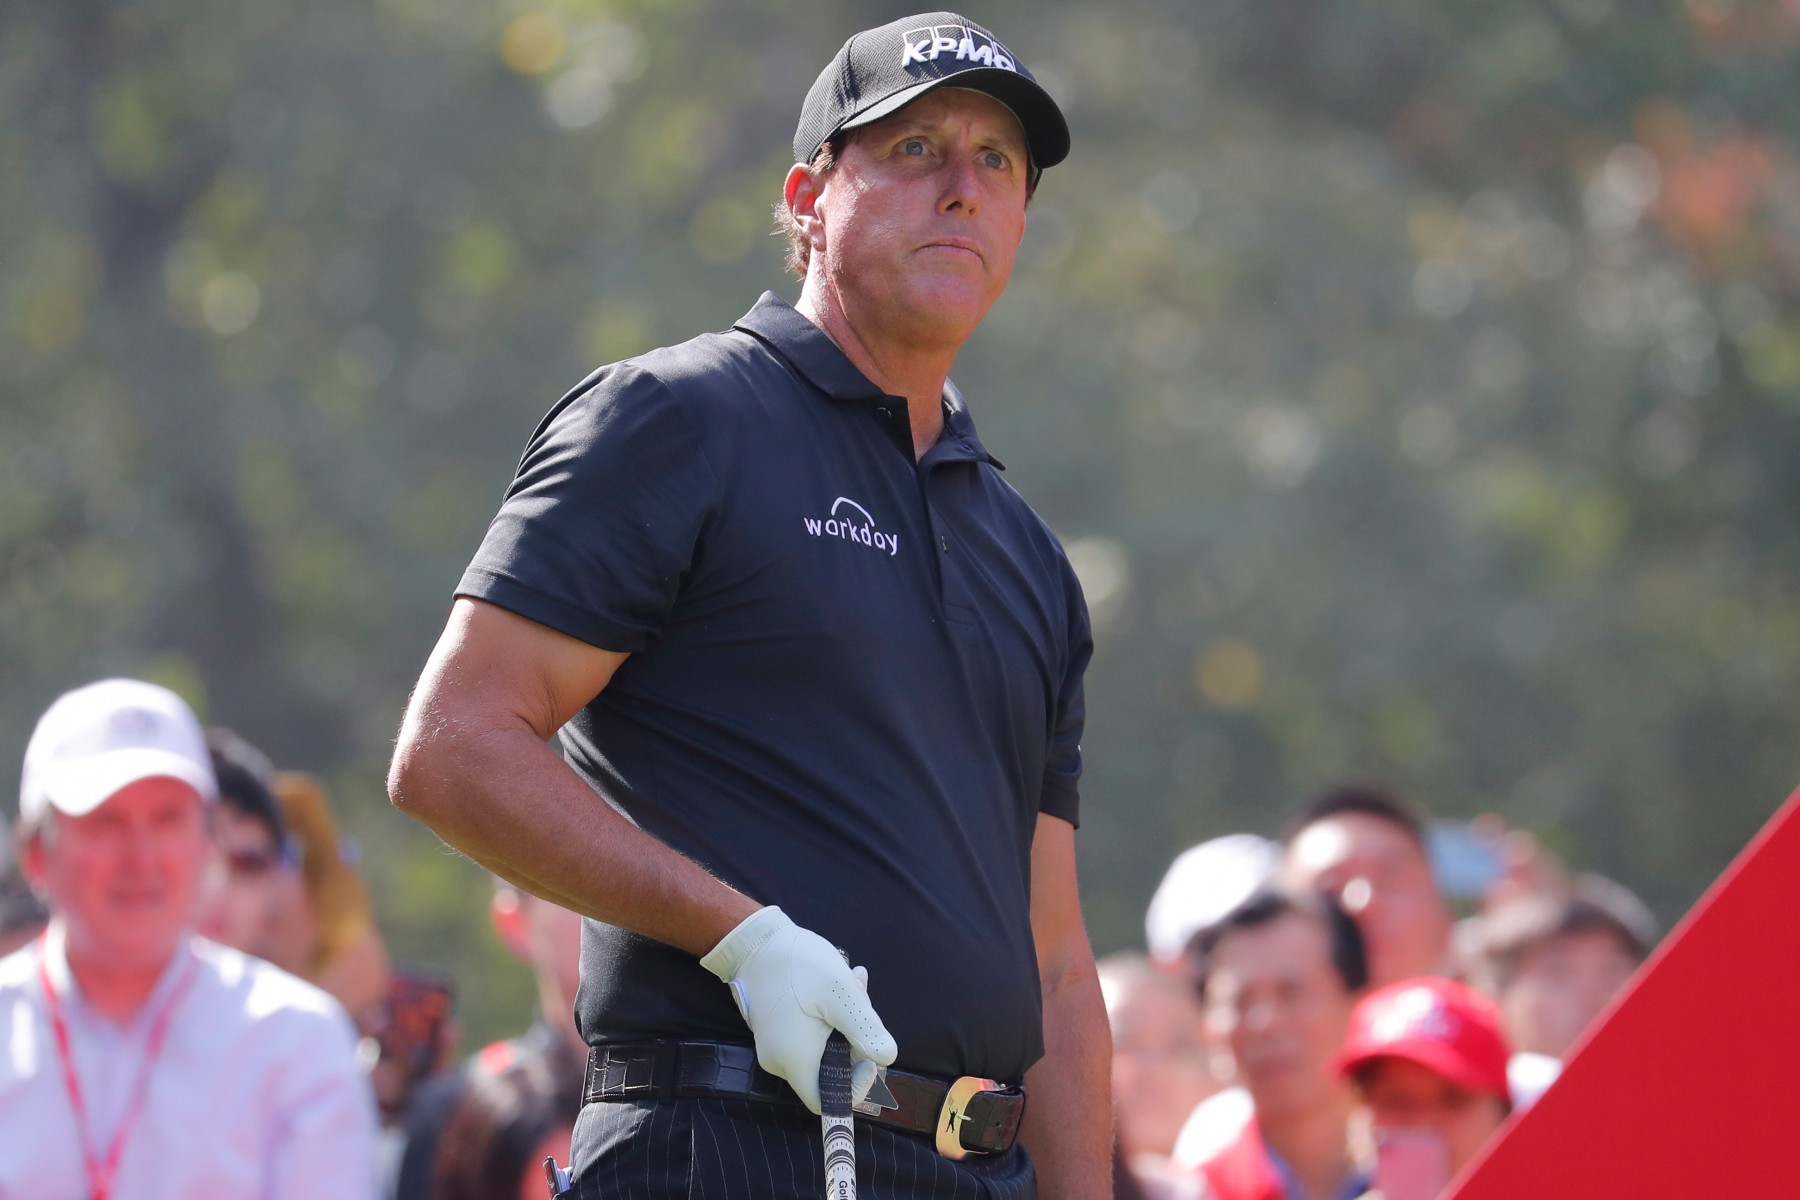 , Phil Mickelson drops out of worlds top 50 for first time in 26 years after HSBC Champions event in China